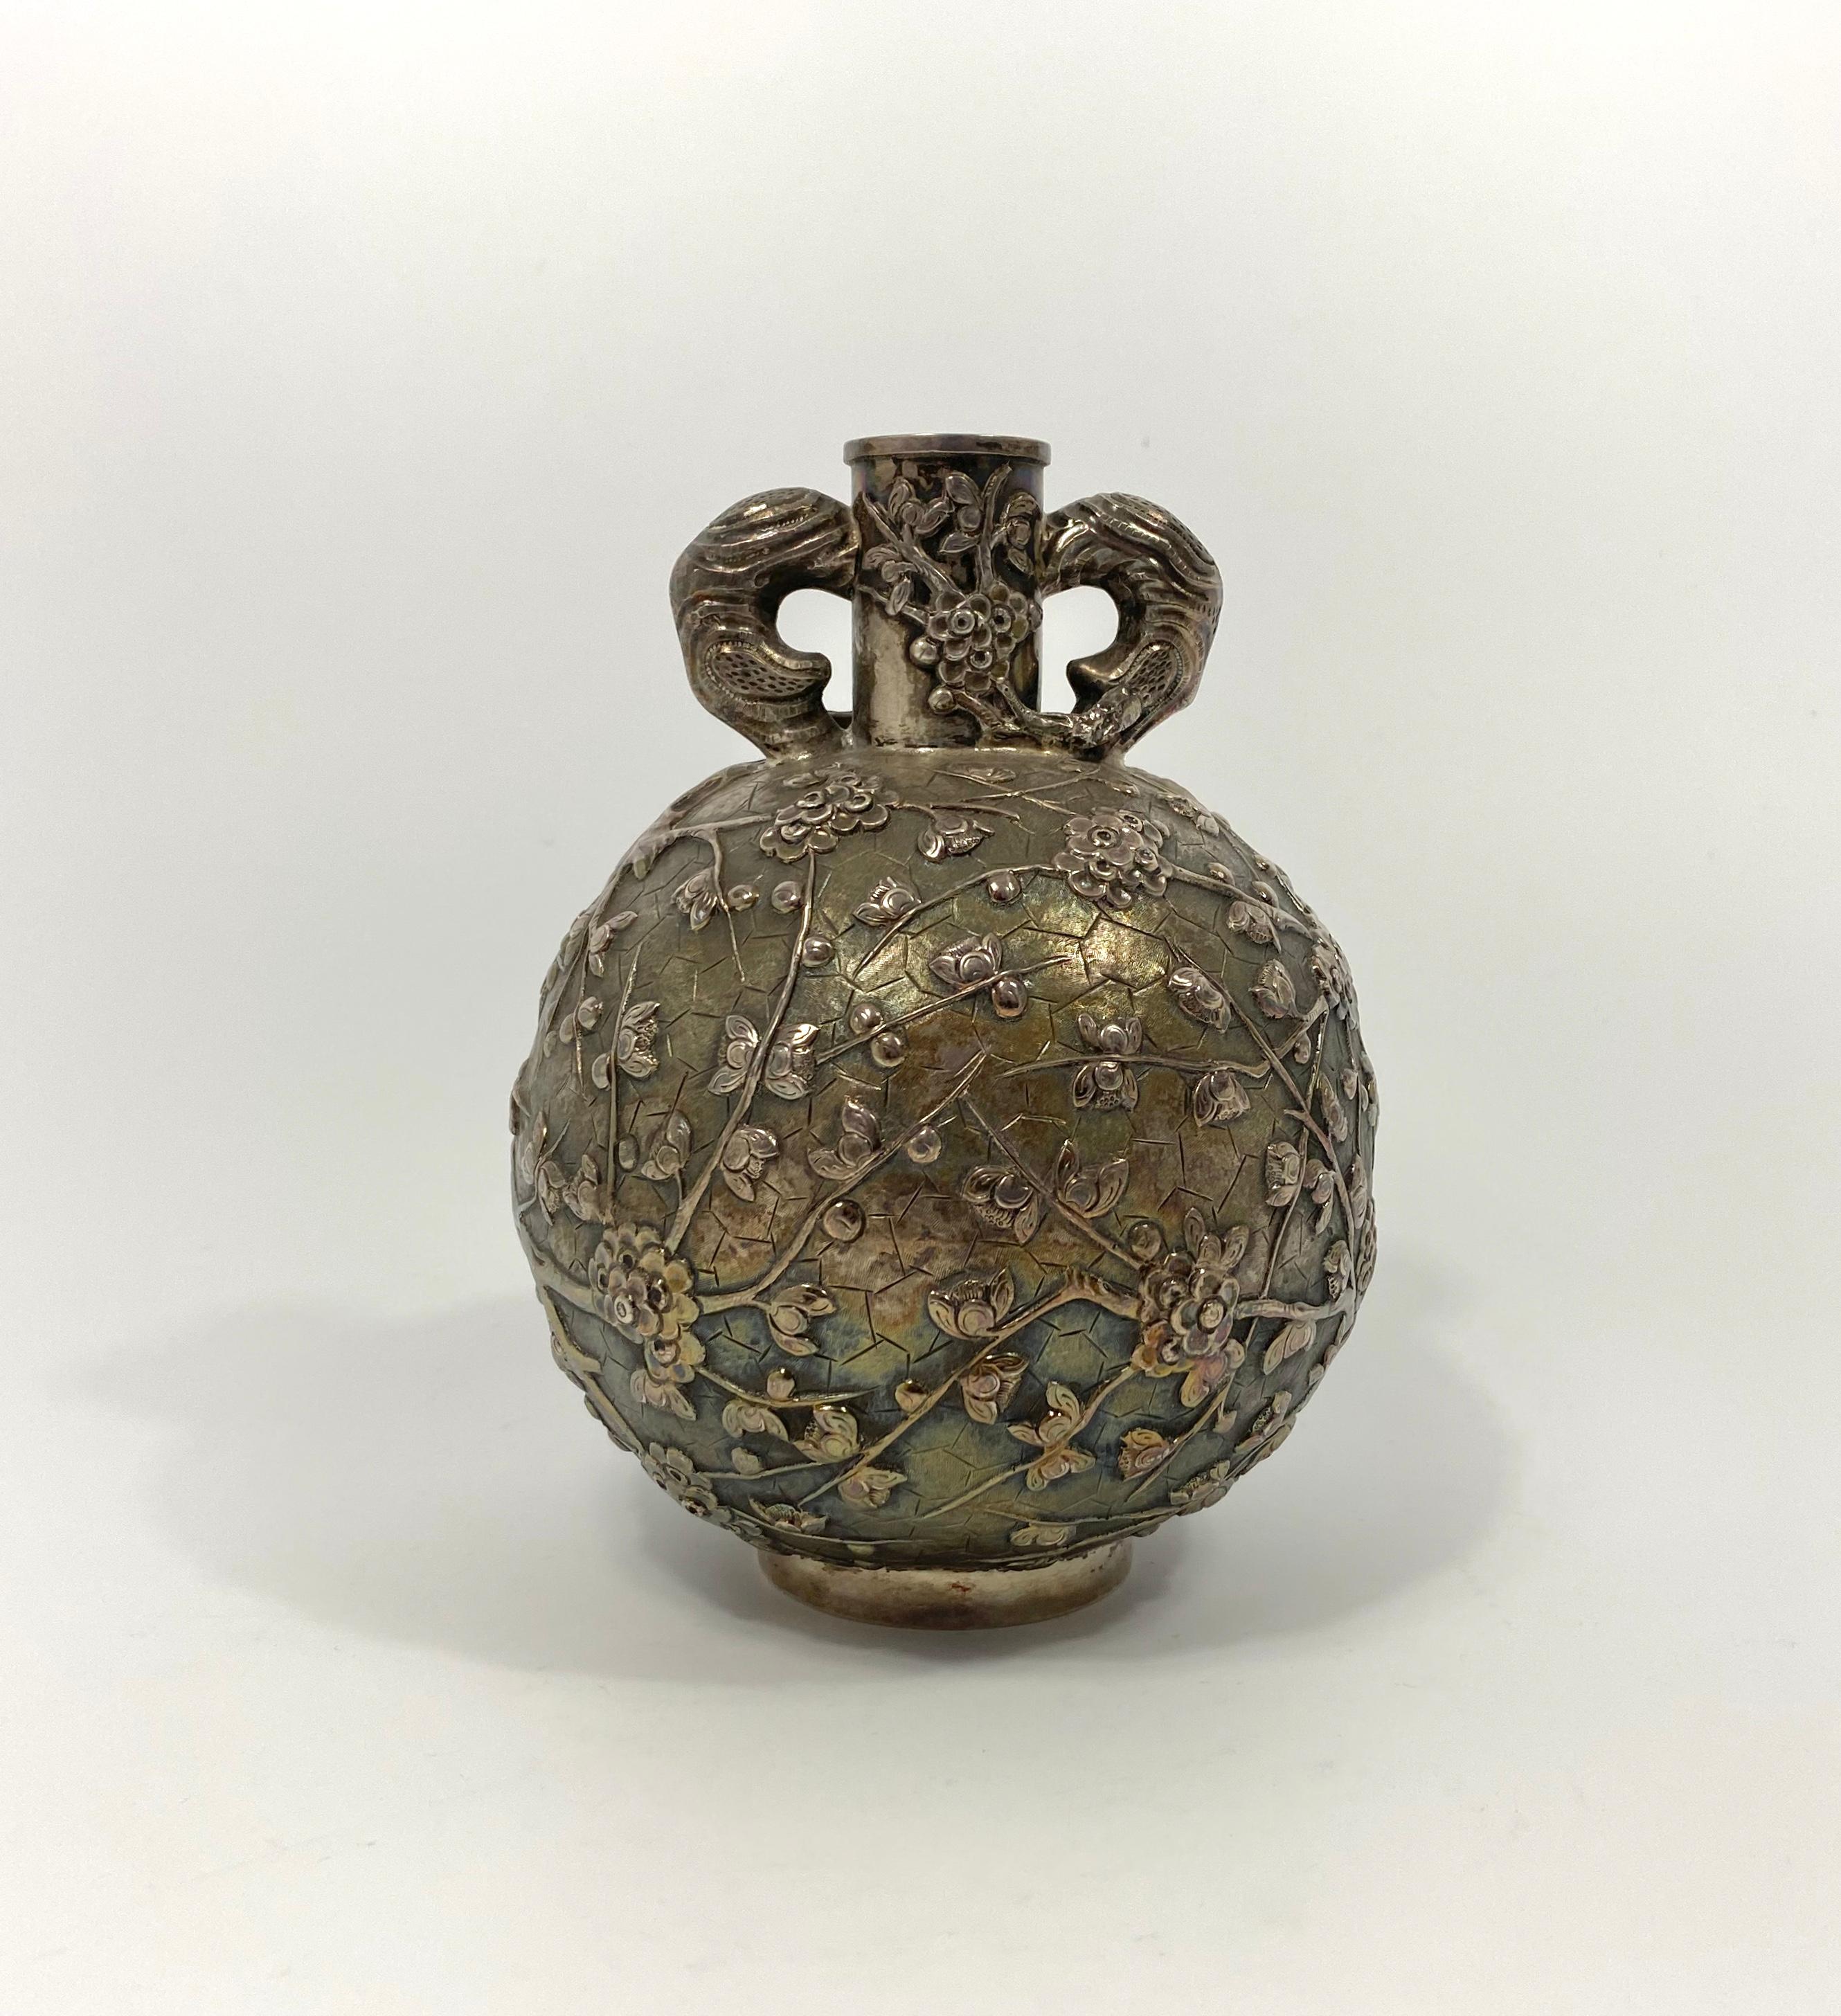 Late 19th Century Chinese Silver Flask ‘Cherry blossom on a cracked ice ground’, Luen Wo, Shanghai